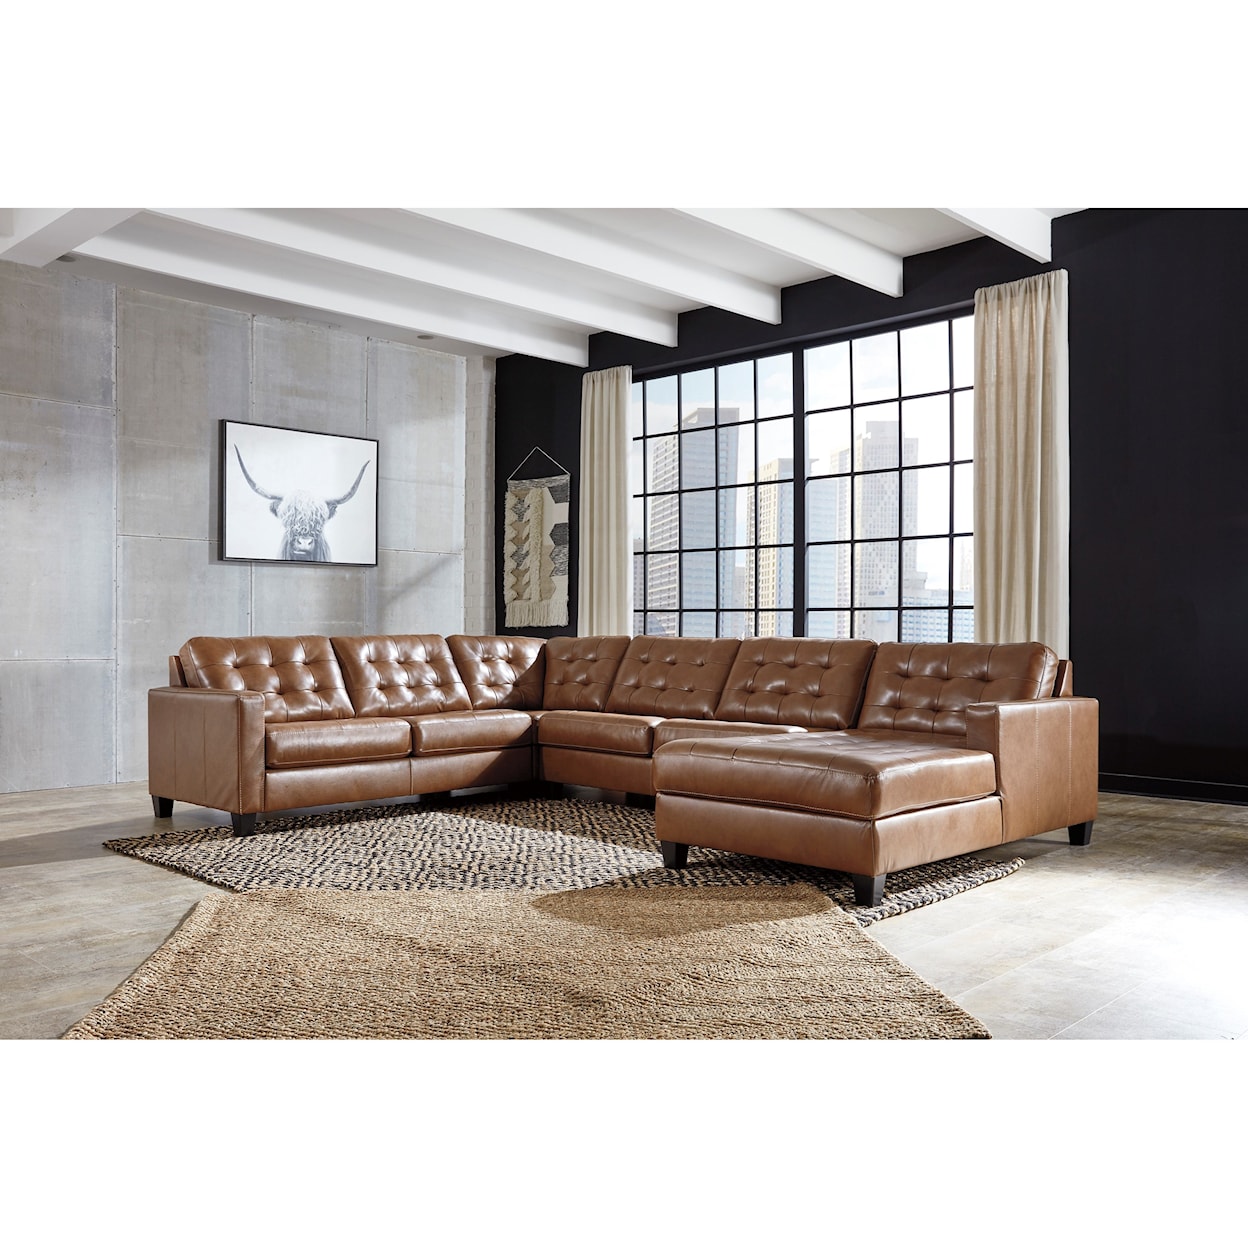 Signature Design by Ashley Baskove 4-Piece Sectional